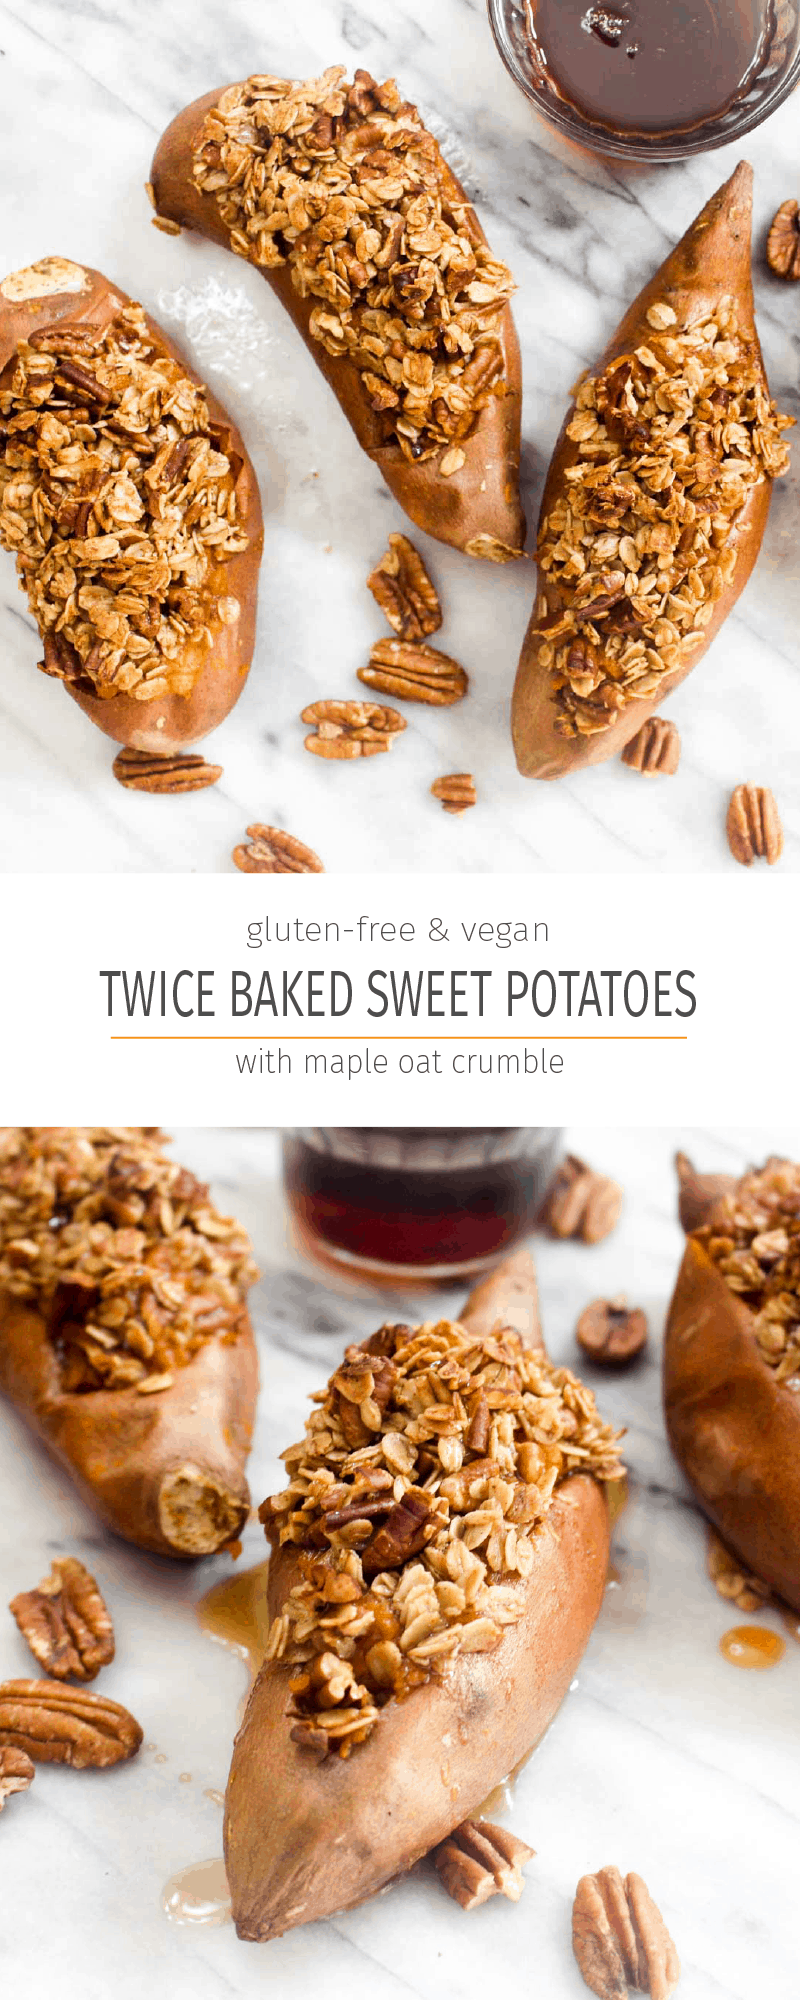 Crumble topped twice baked sweet potatoes collage